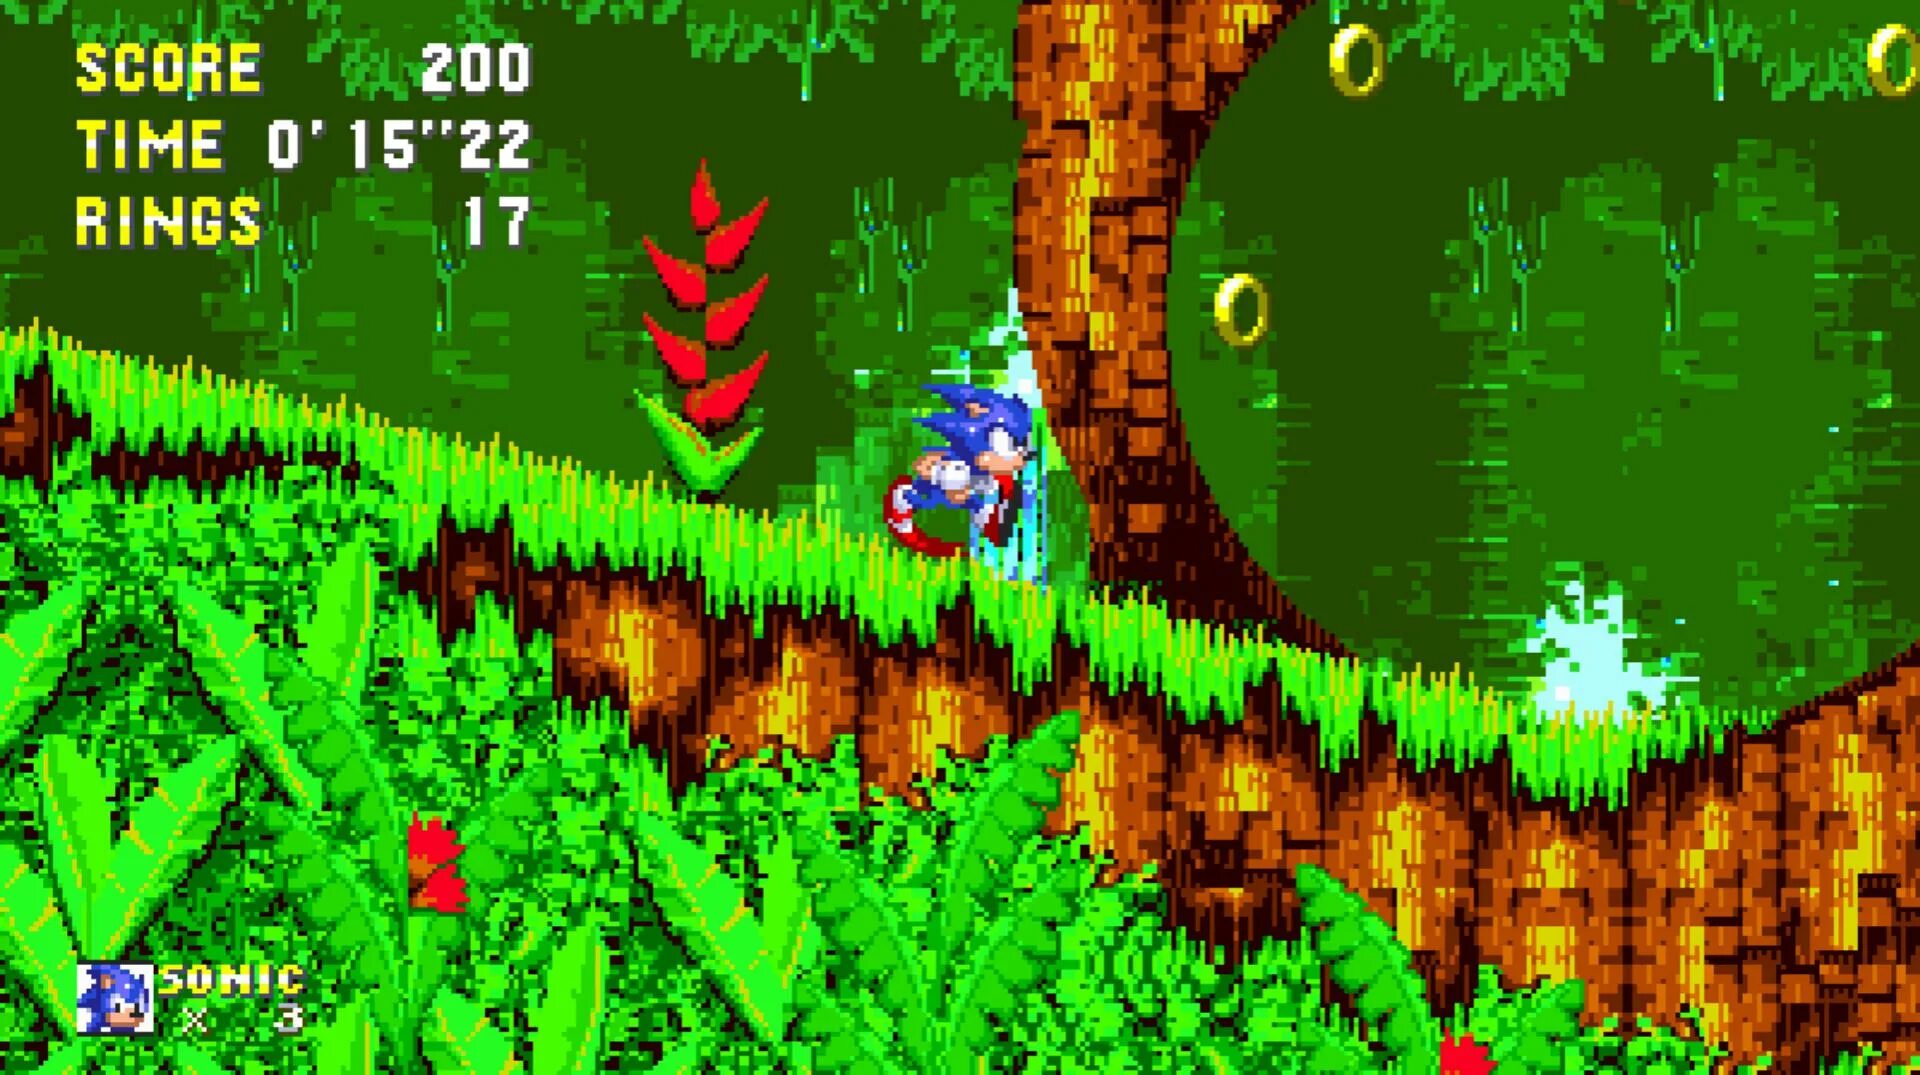 Sonic 3 mobile. Соник 3 АИР. Sonic 3 a.i.r. (Angel Island revisited). Sonic 3 and Knuckles. Sonic 3 Forever.